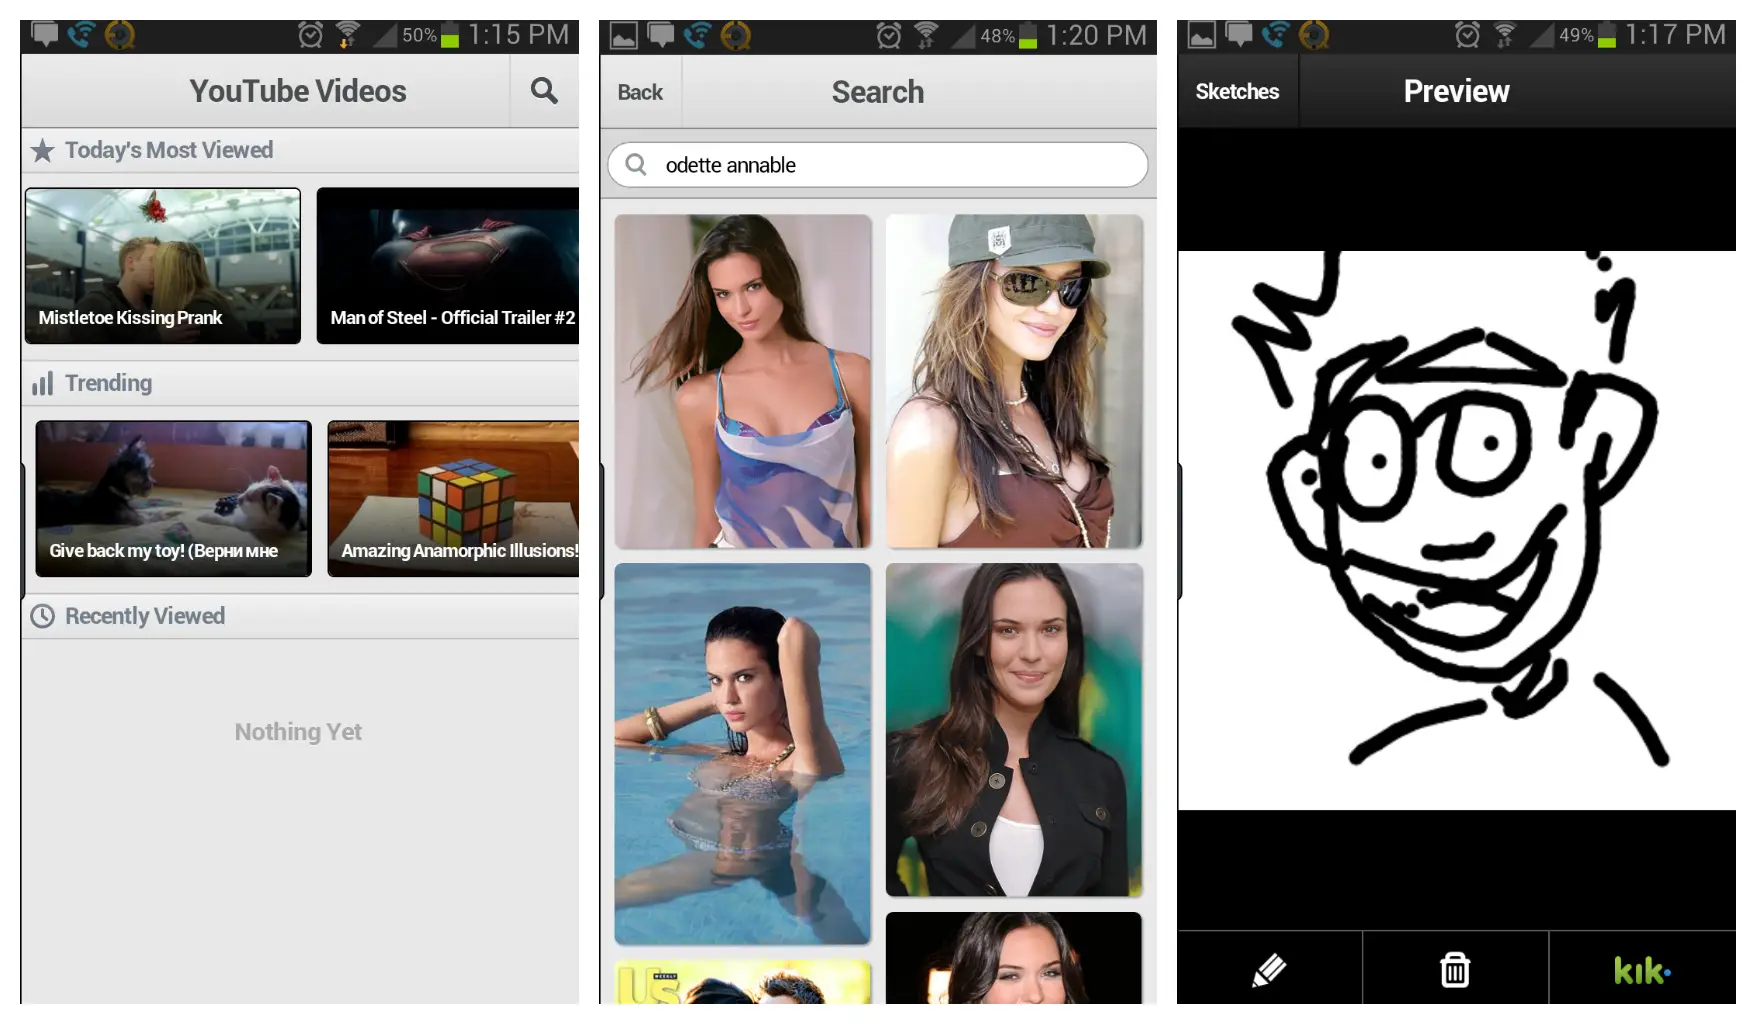 Latest Kik Messenger update infuses the app with Reddit browsing and sharin...